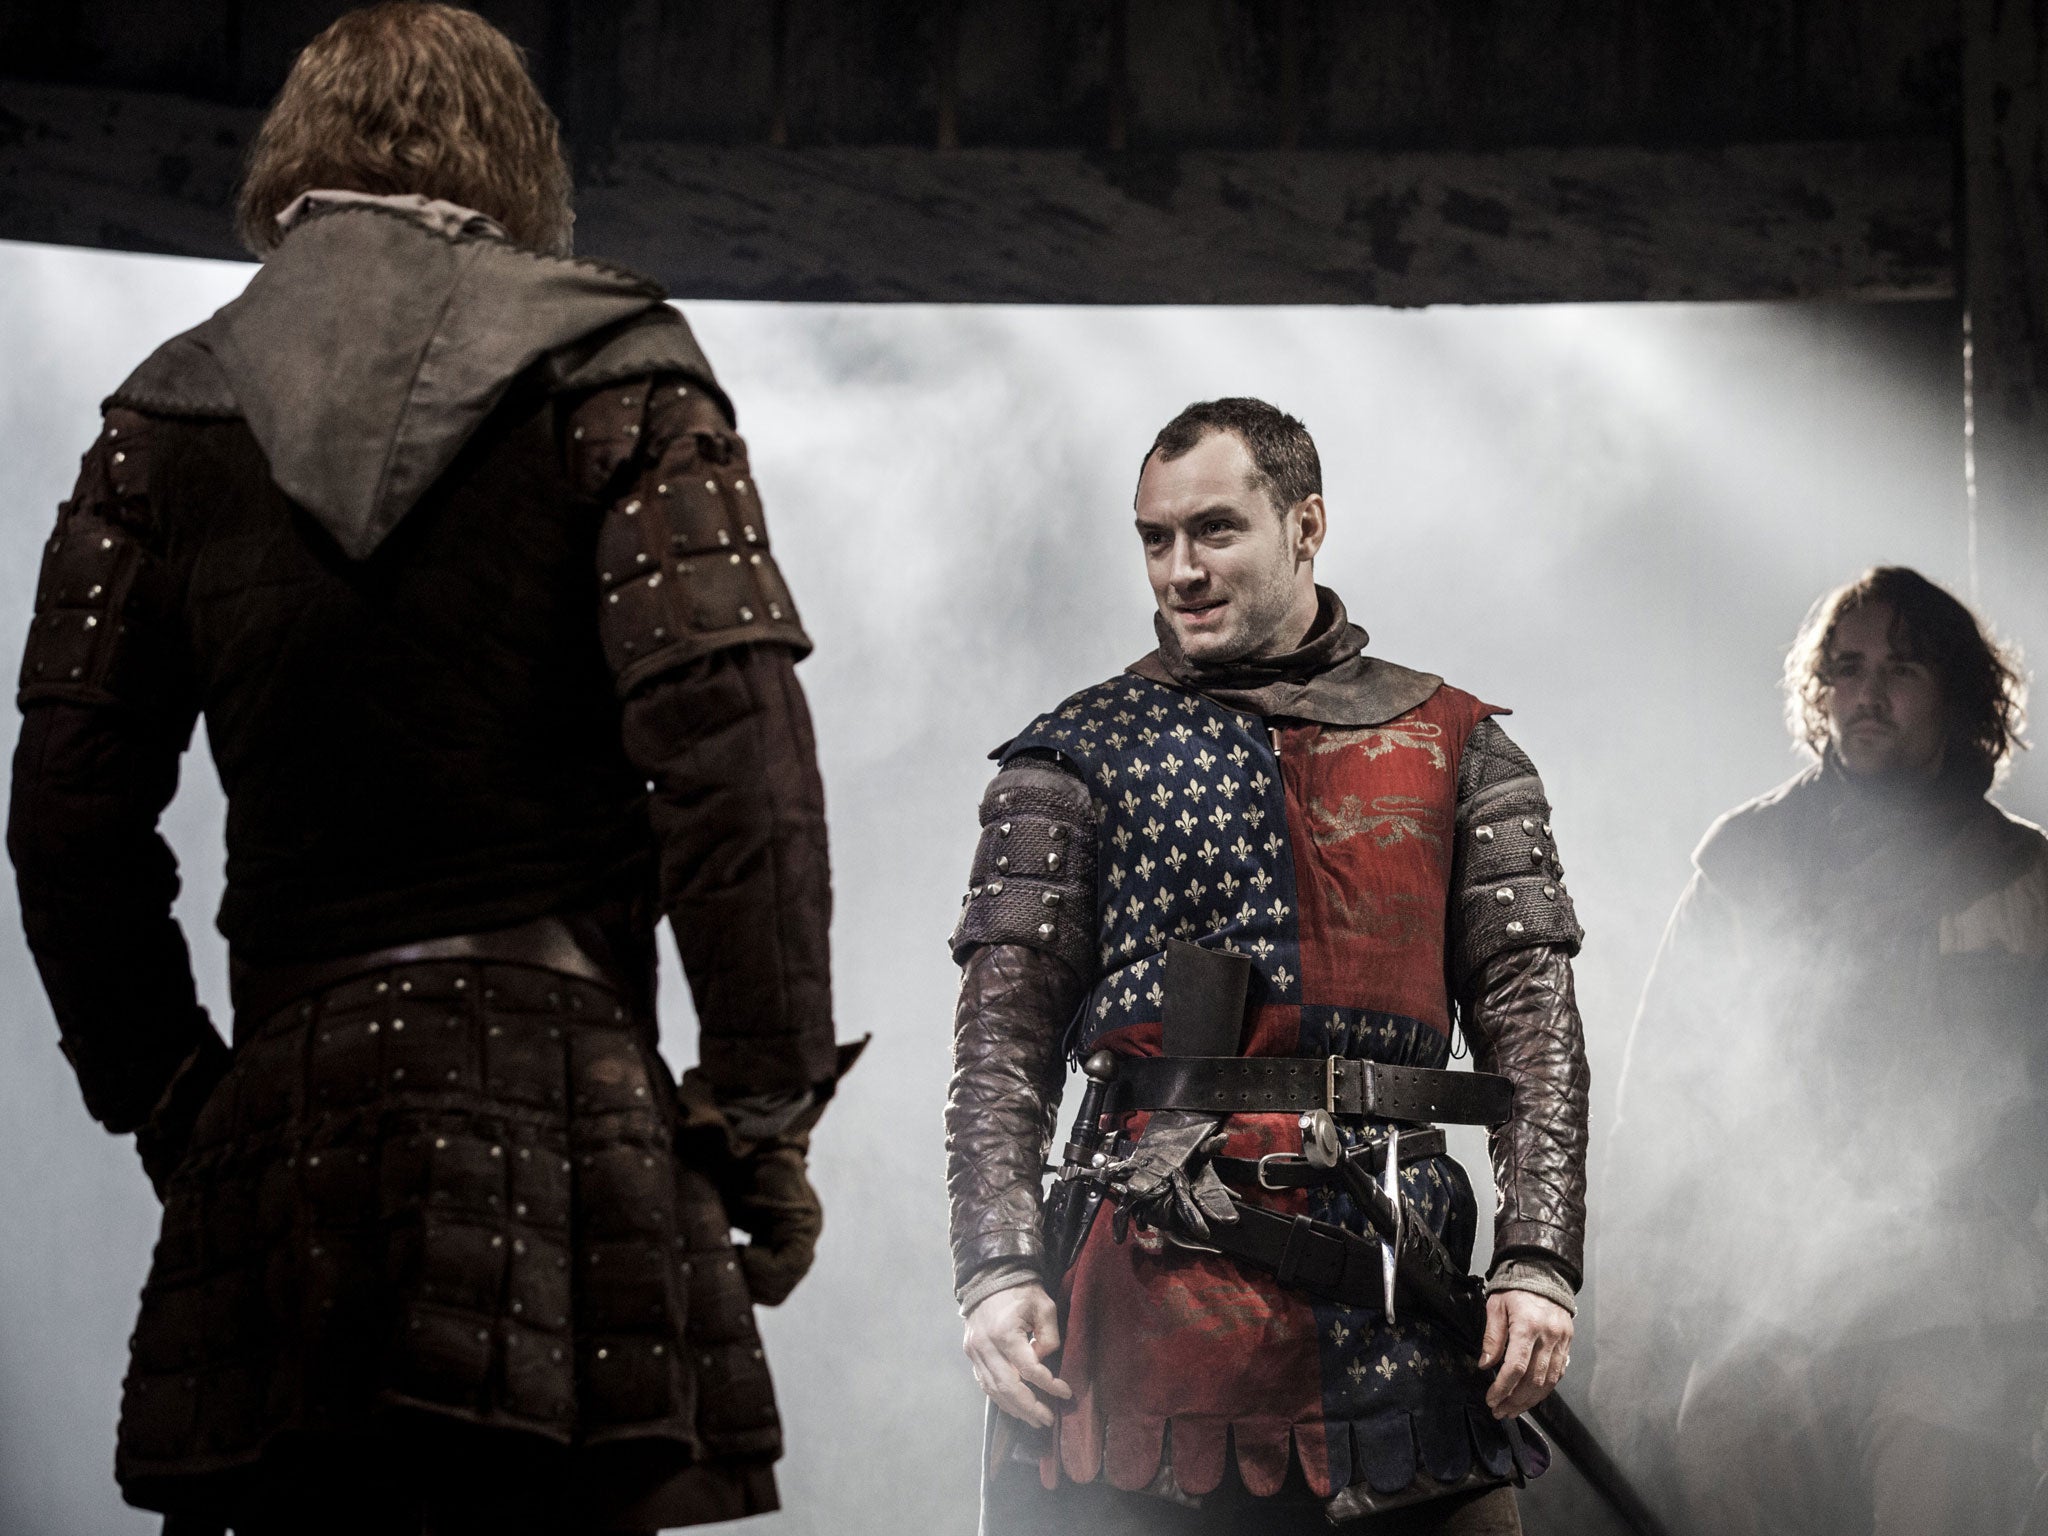 Jude Law as Henry V